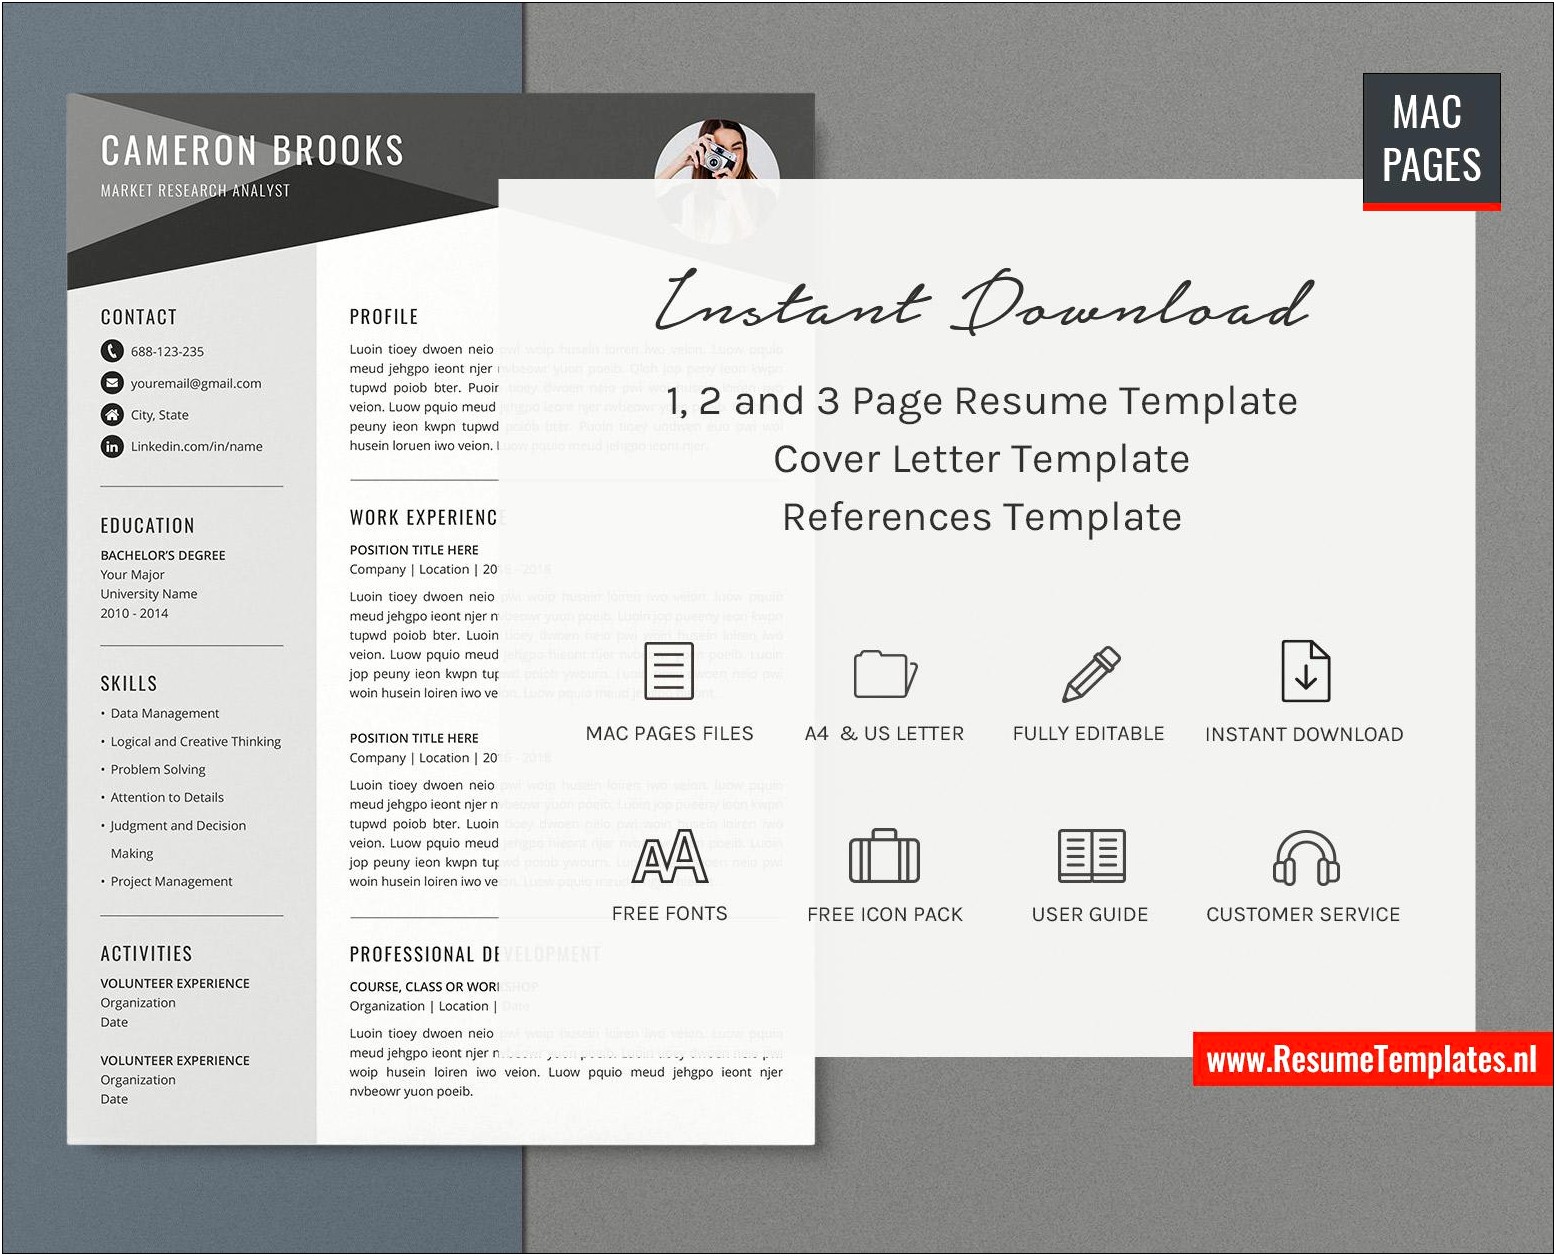 Resume Cover Letter Template Mac Pages